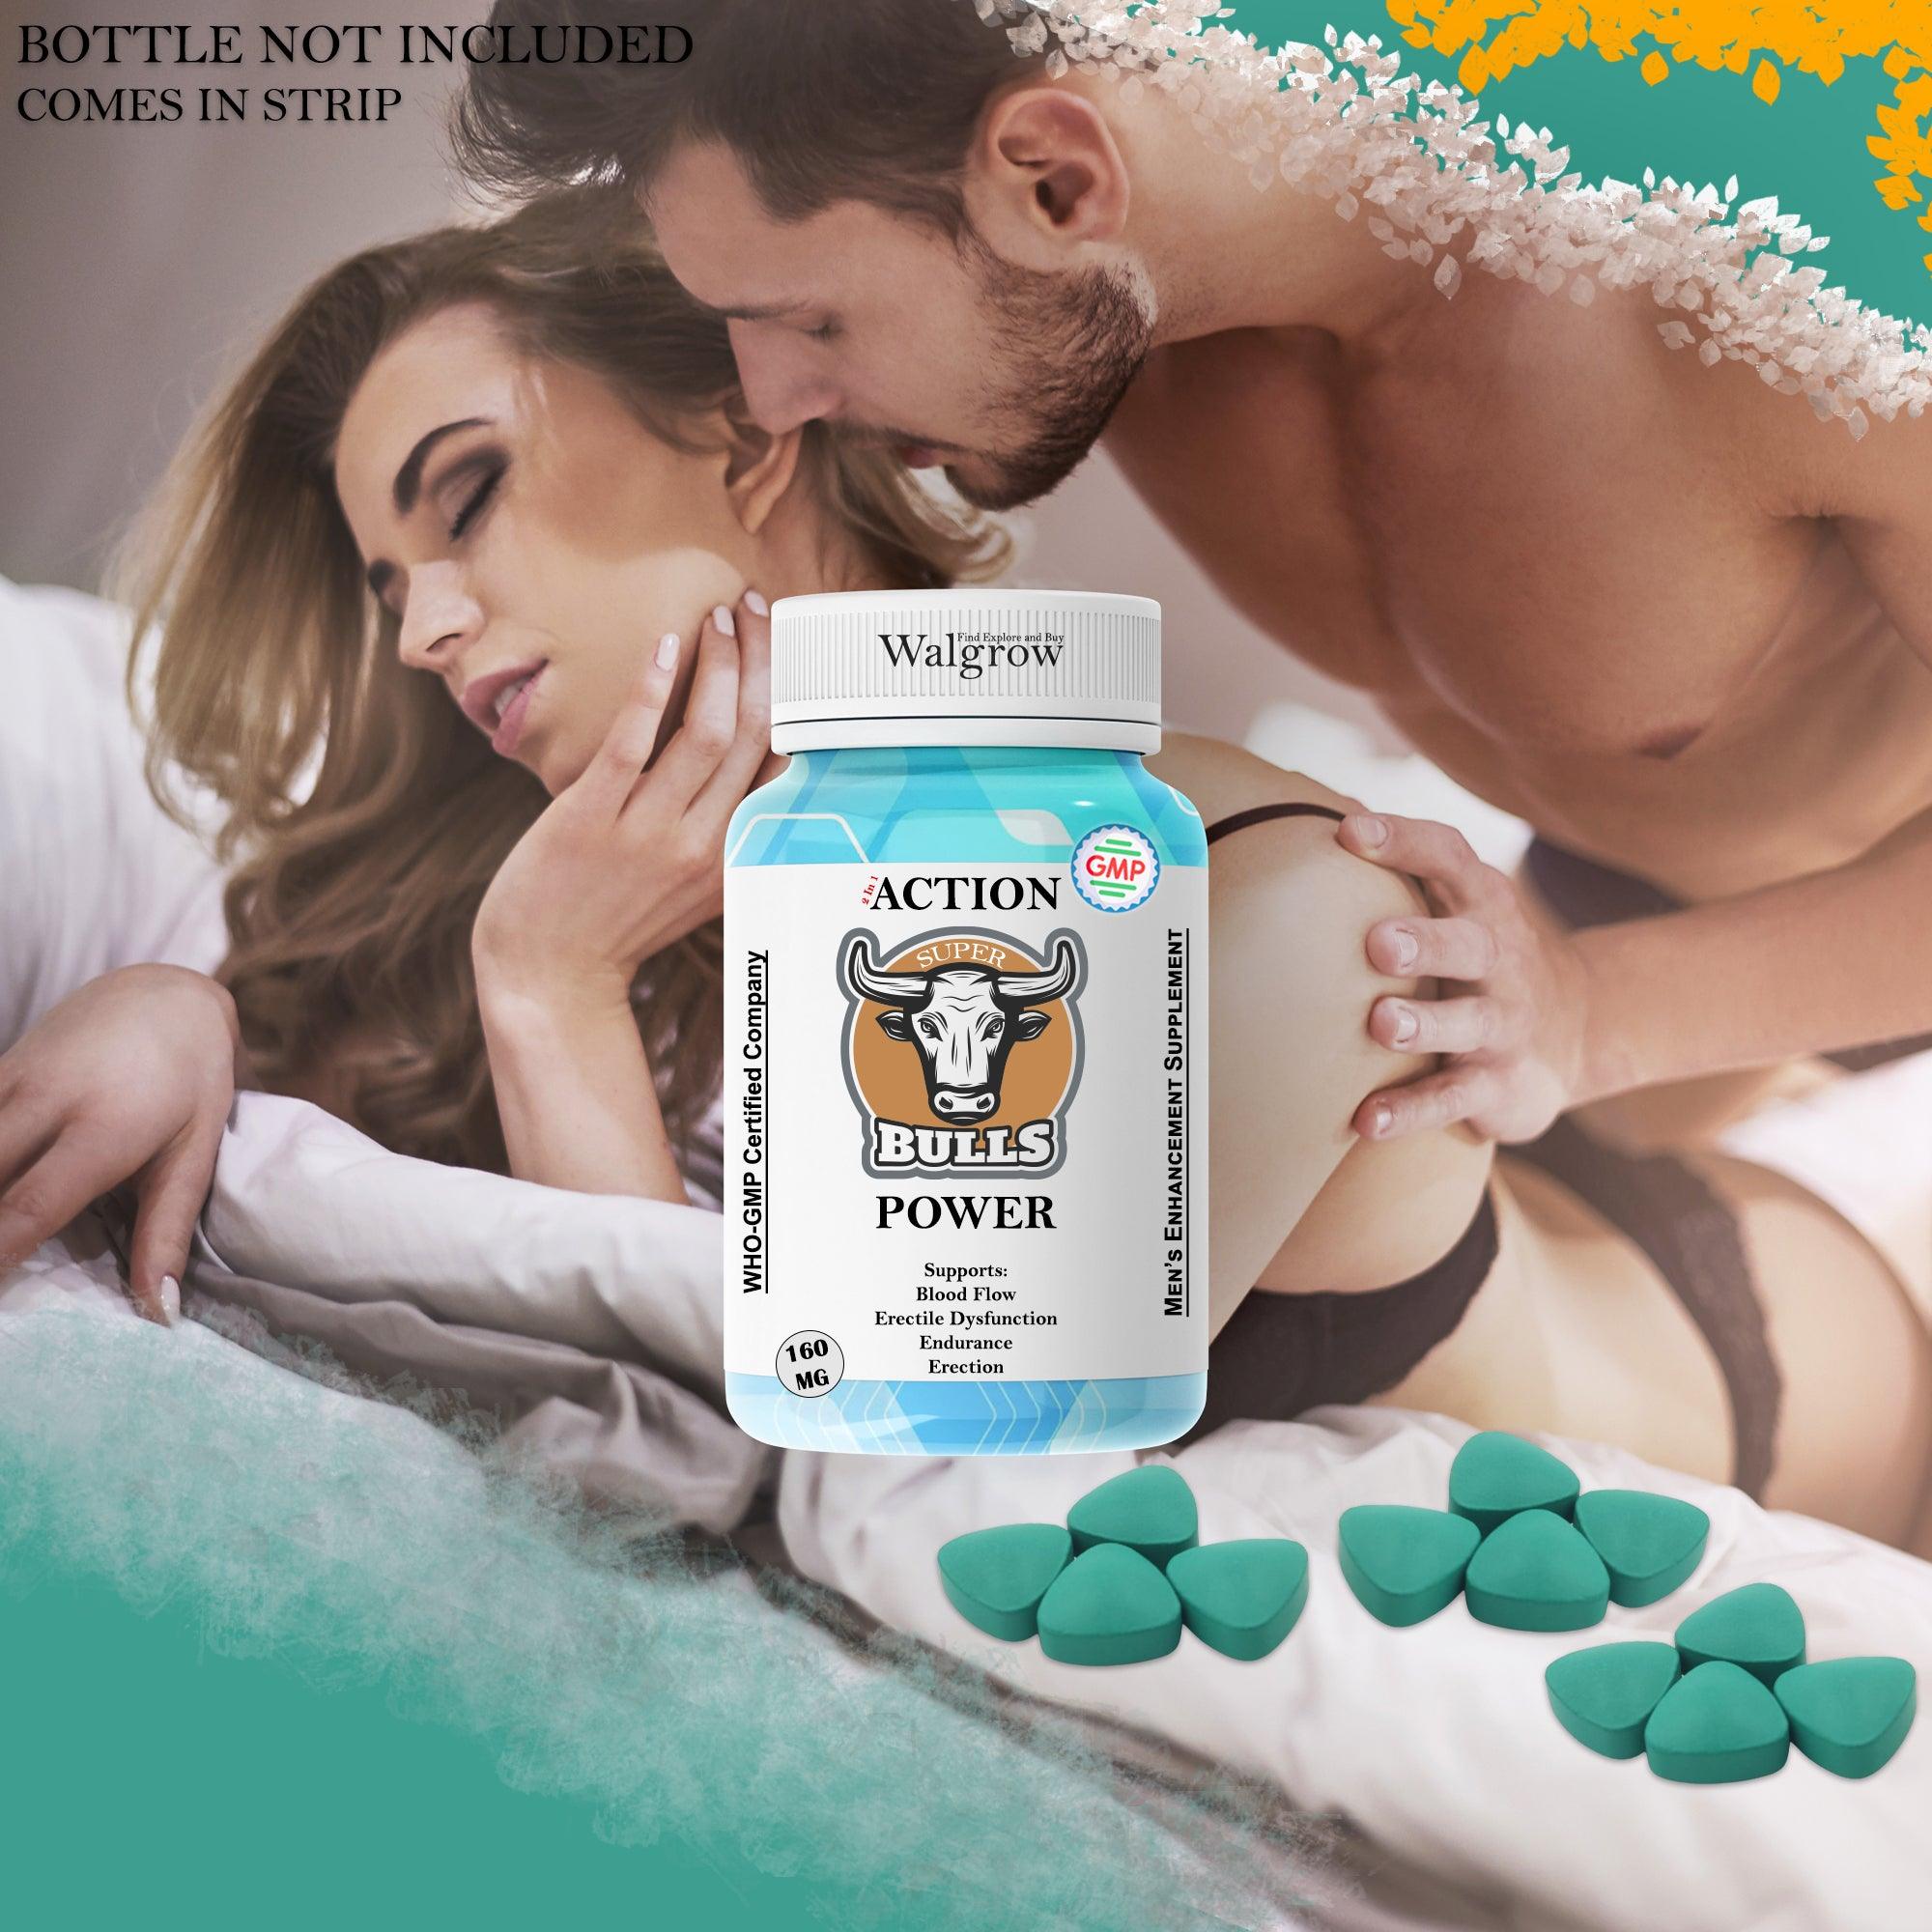 2 In 1 Action Super Bull's Power Men's Sex Drive Strong Max Extreme Enhancement (160mg, Tablets) - Walgrow.com